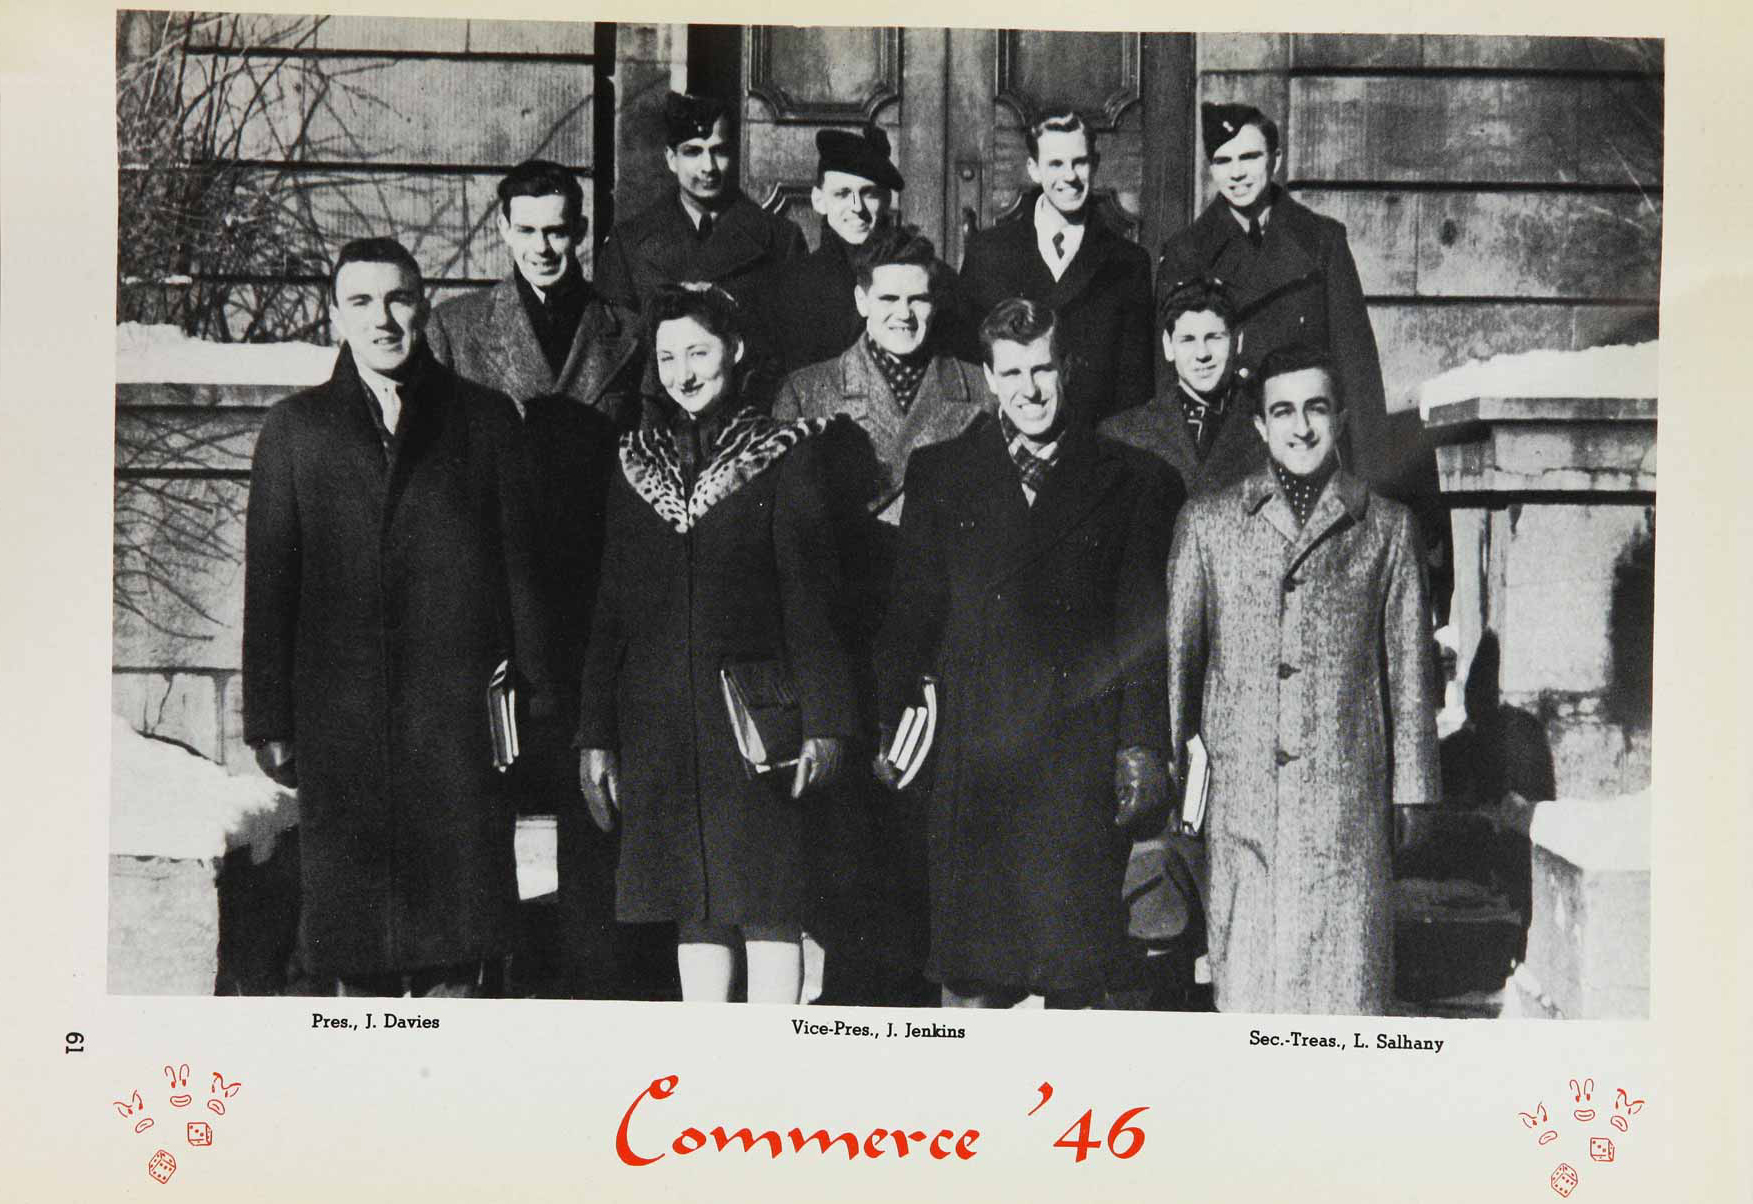 McGill Yearbook: 1944